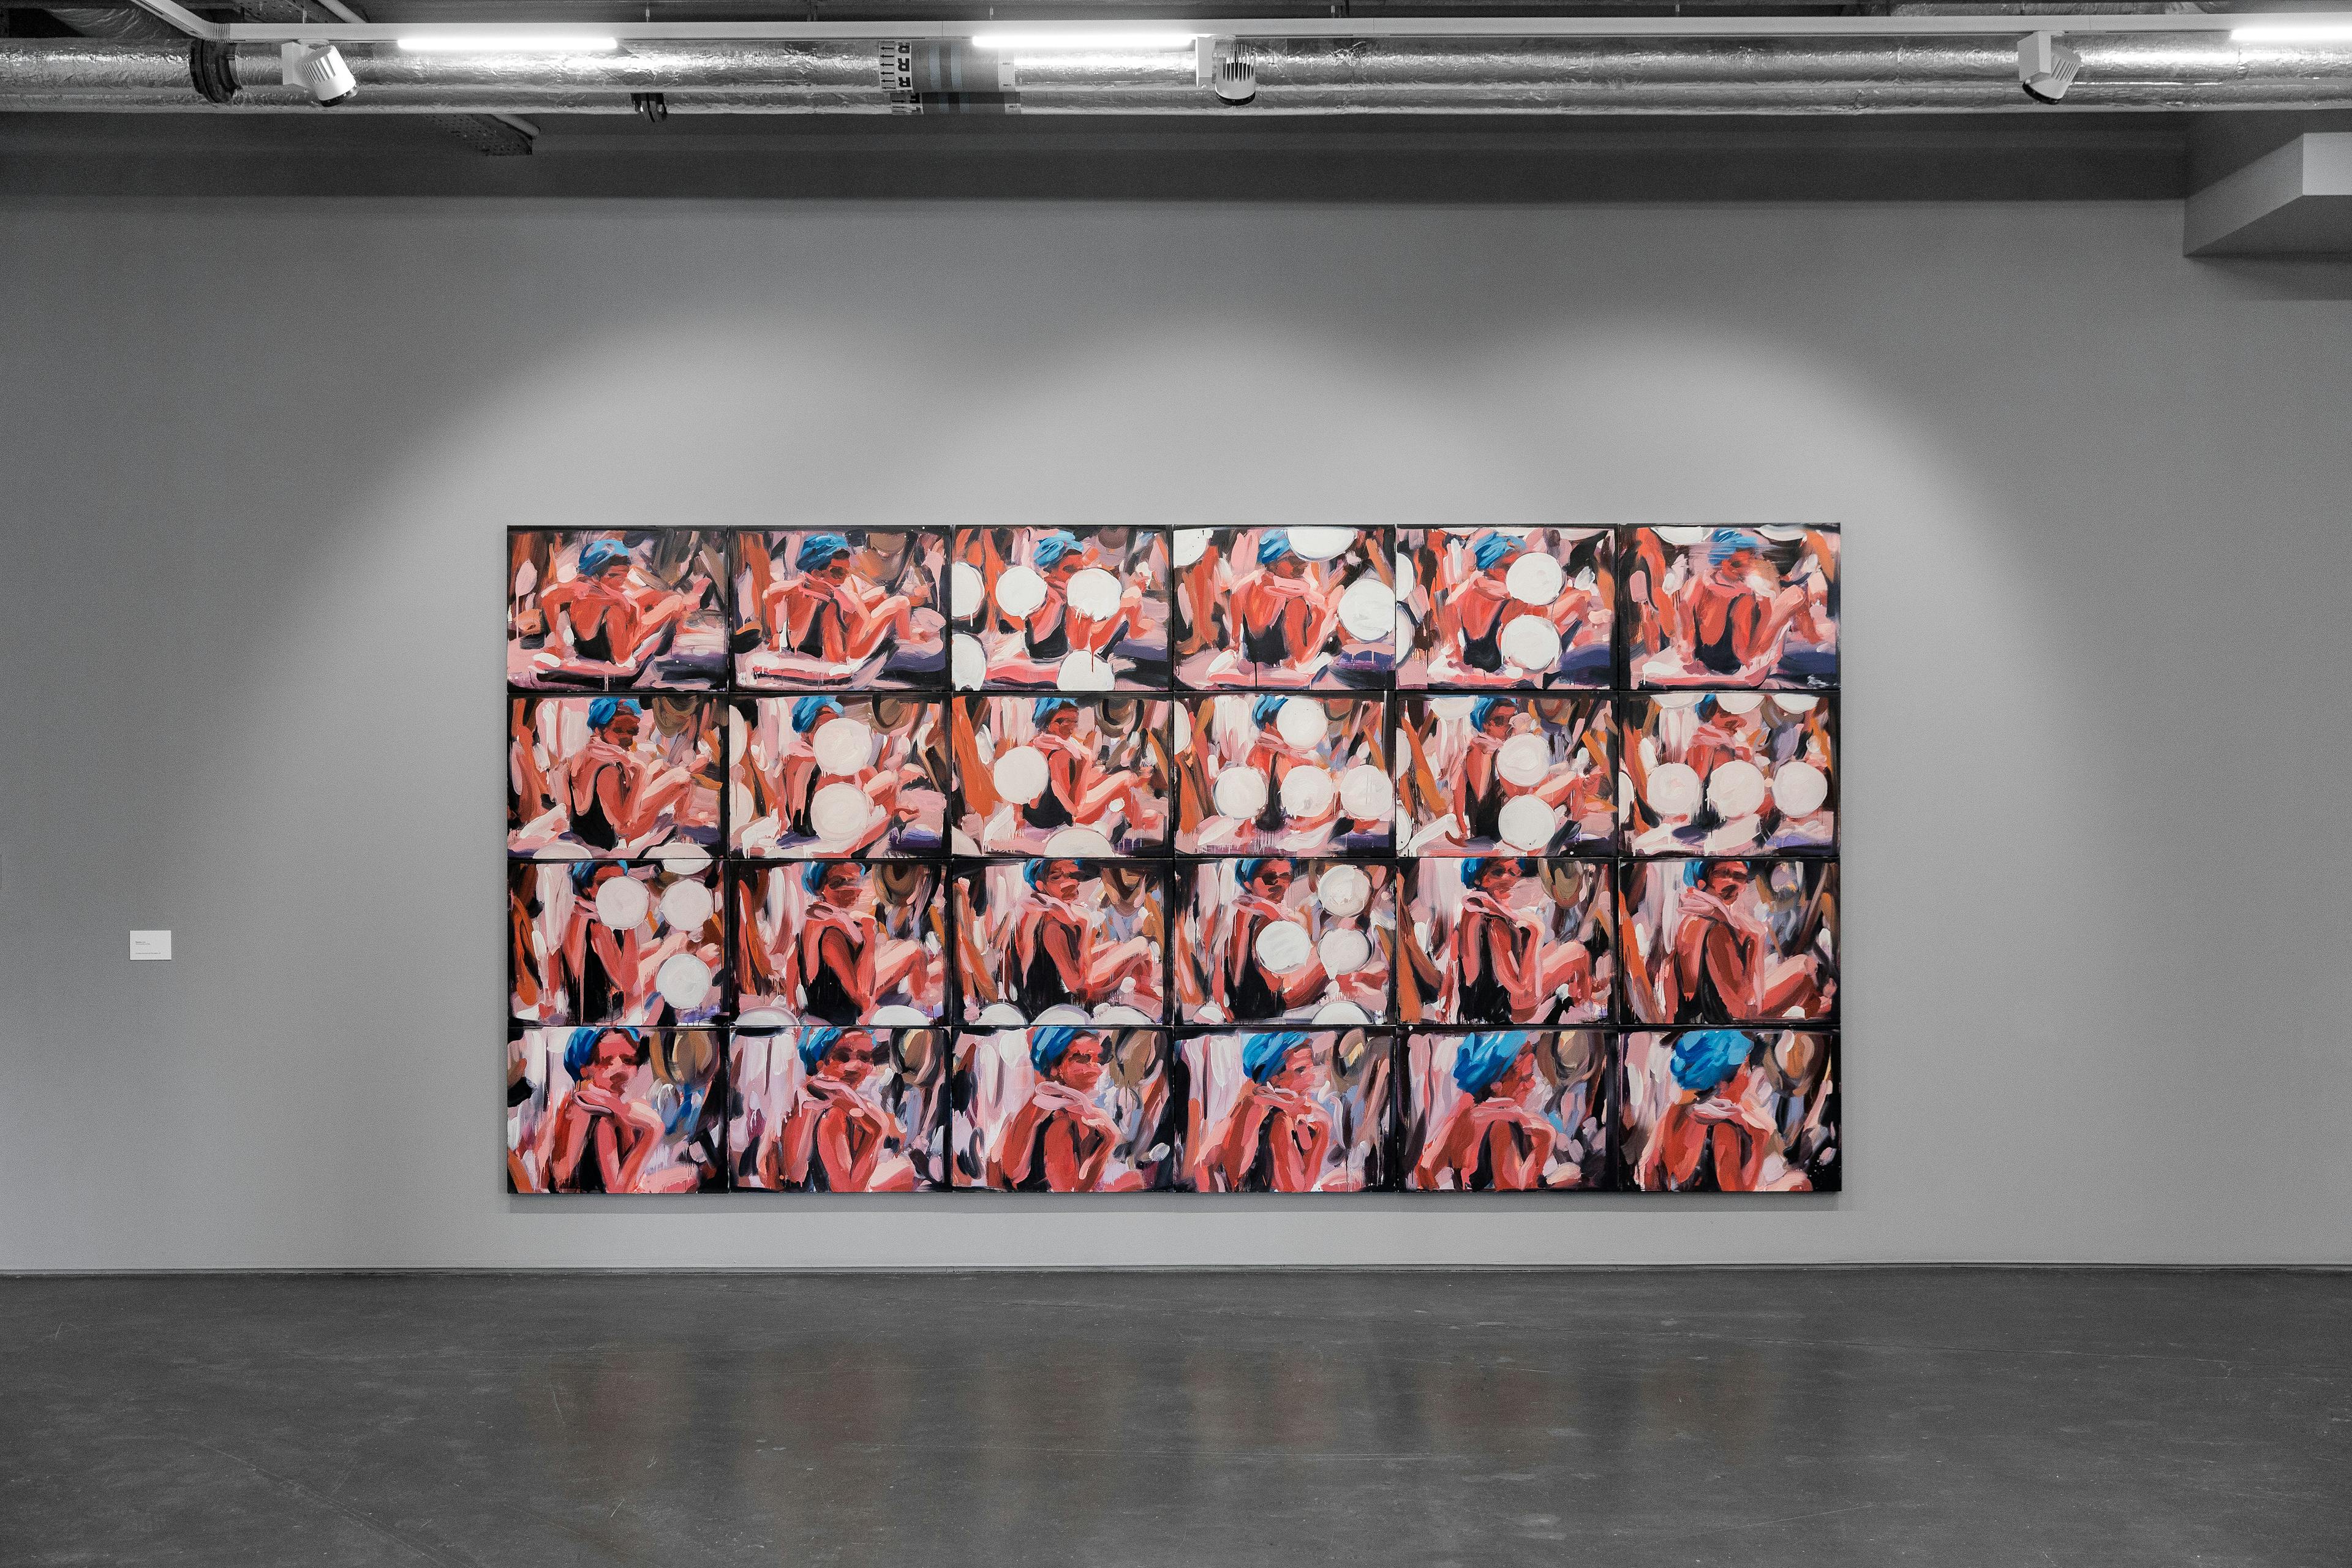 A large 24 panel painting by Laura Lancaster featuring frames from film stills